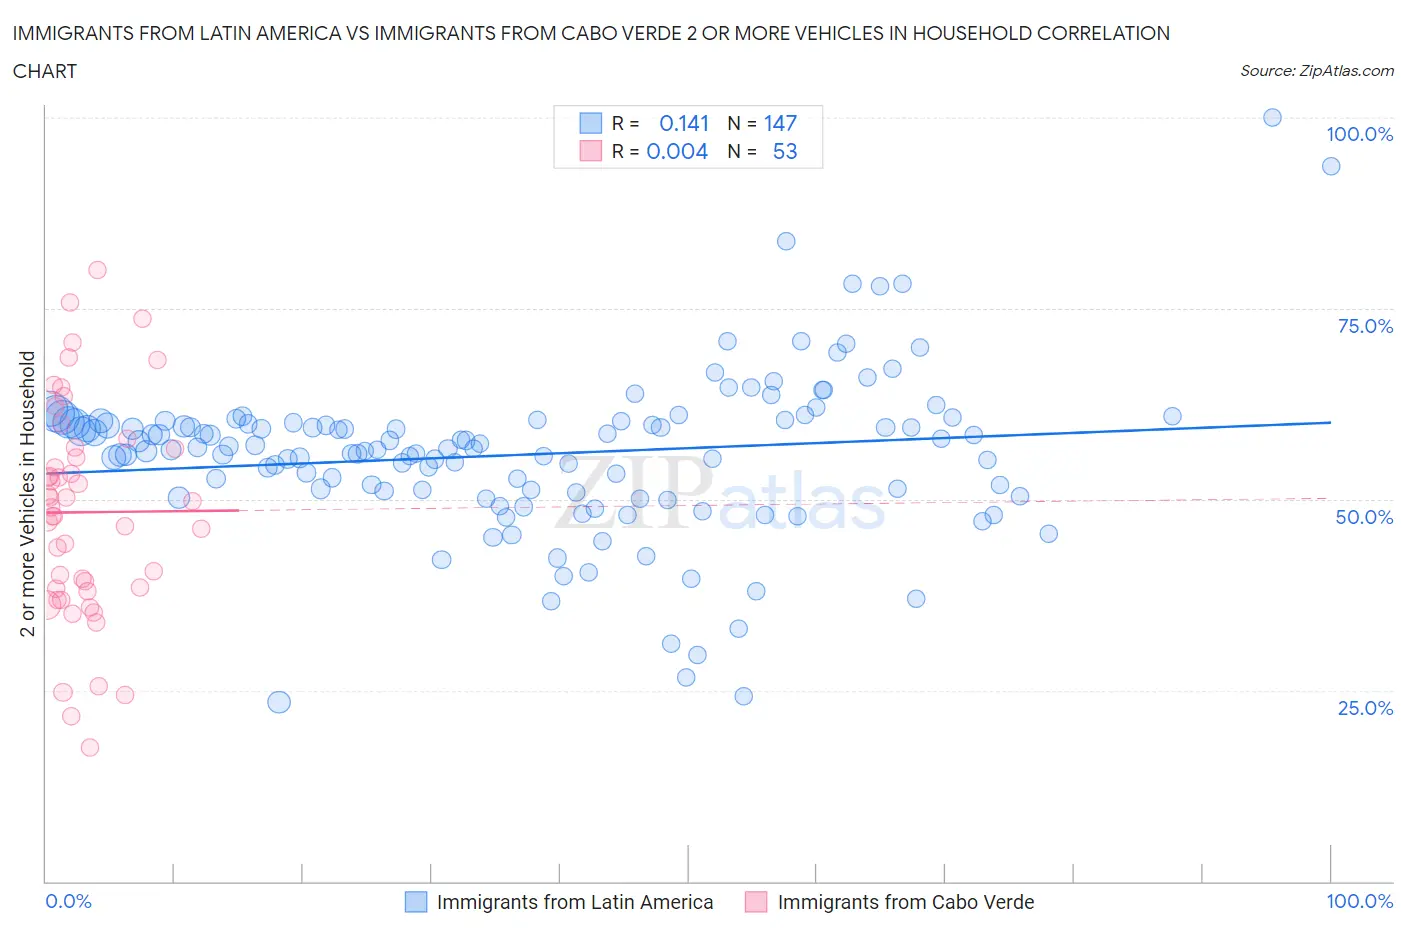 Immigrants from Latin America vs Immigrants from Cabo Verde 2 or more Vehicles in Household